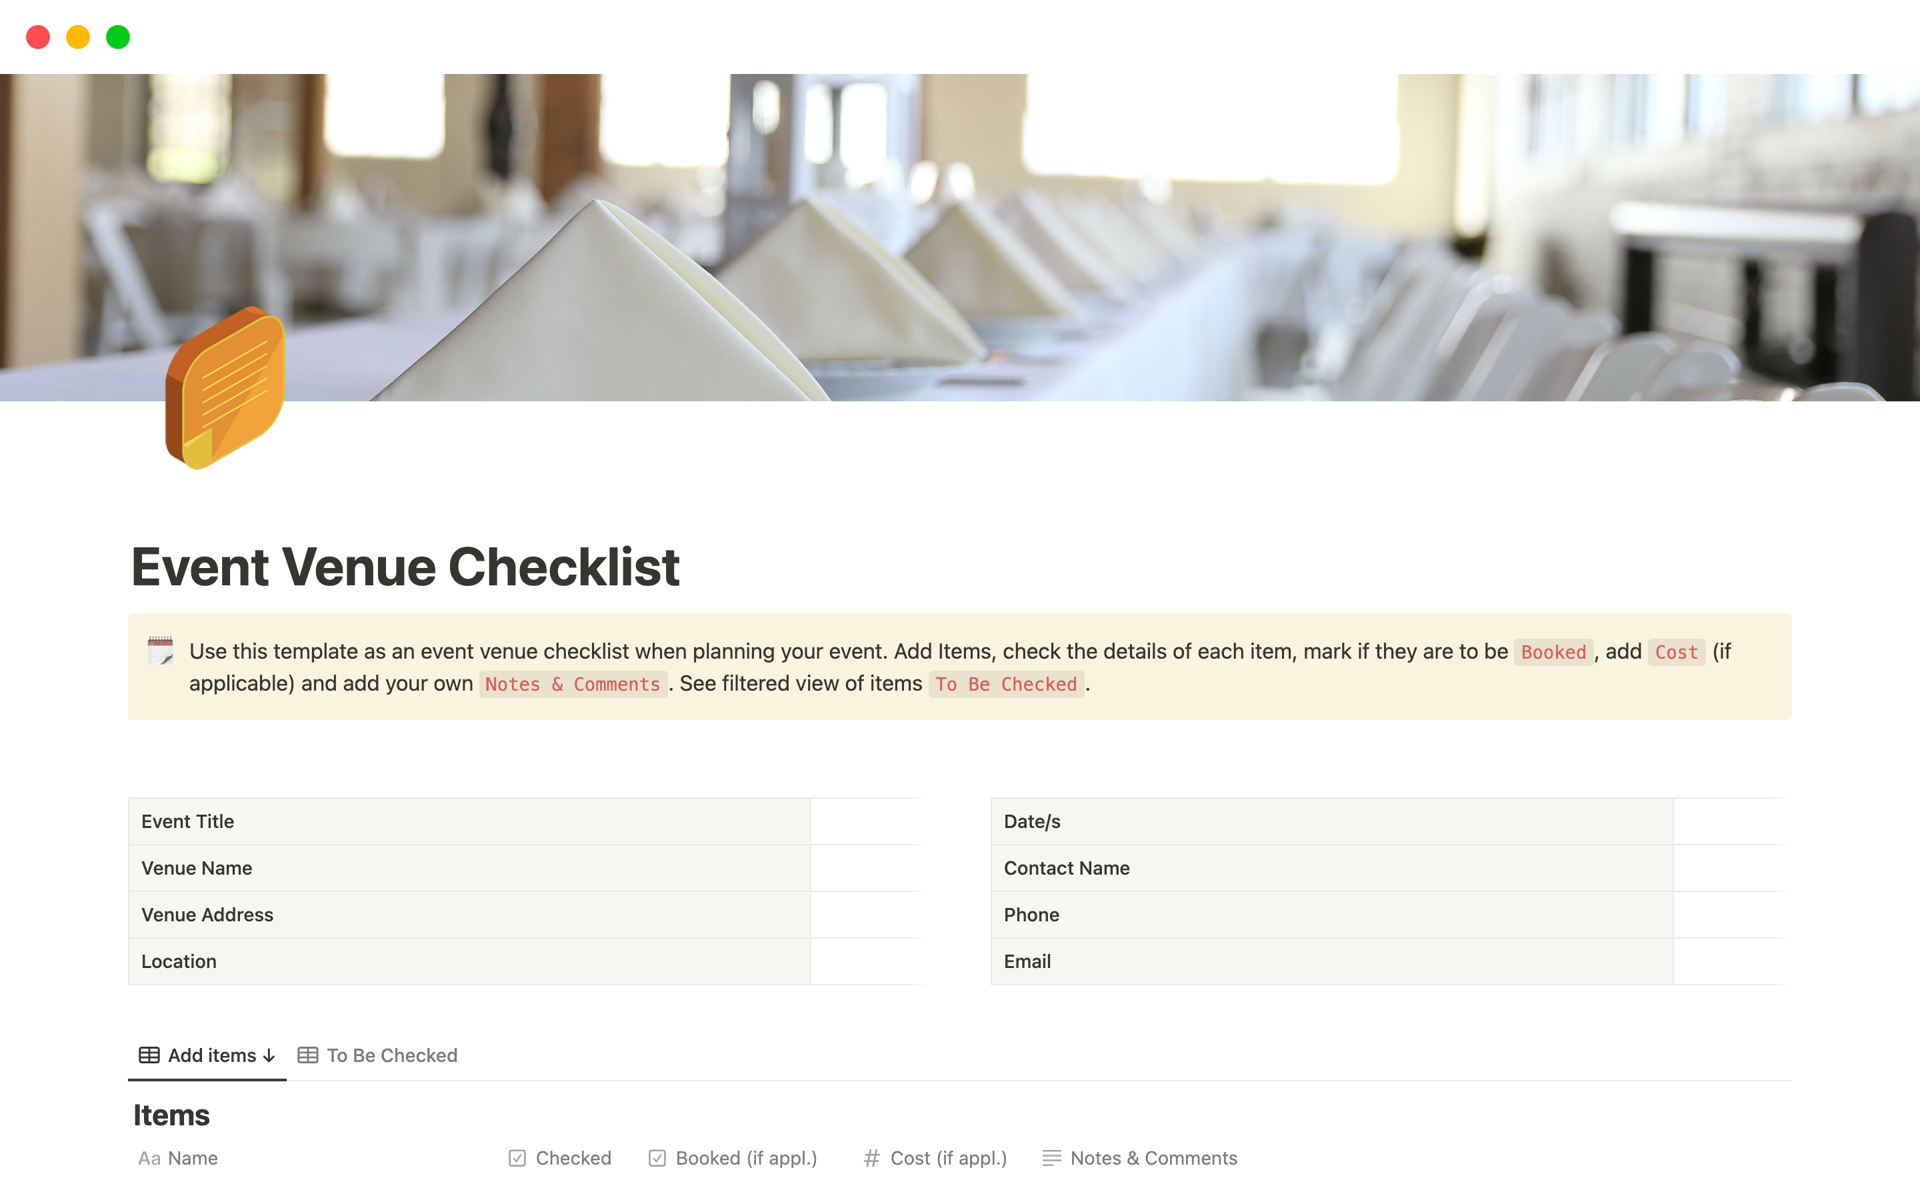 Use this template as an event venue checklist when planning your event.